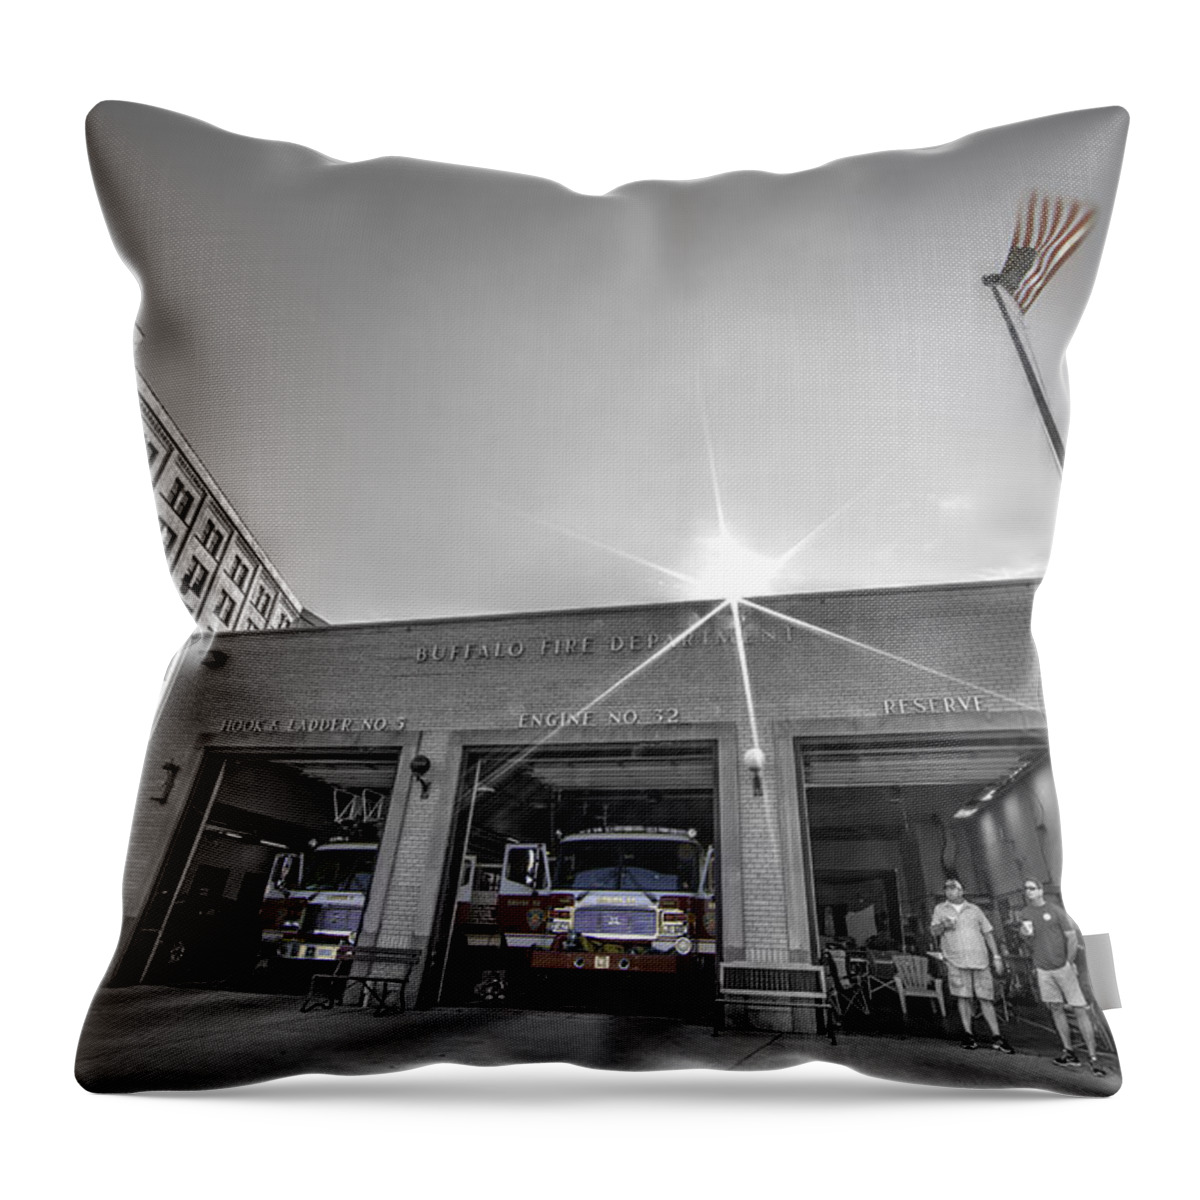 Engine 32 Throw Pillow featuring the photograph Engine 32 Ladder 5 by John Angelo Lattanzio